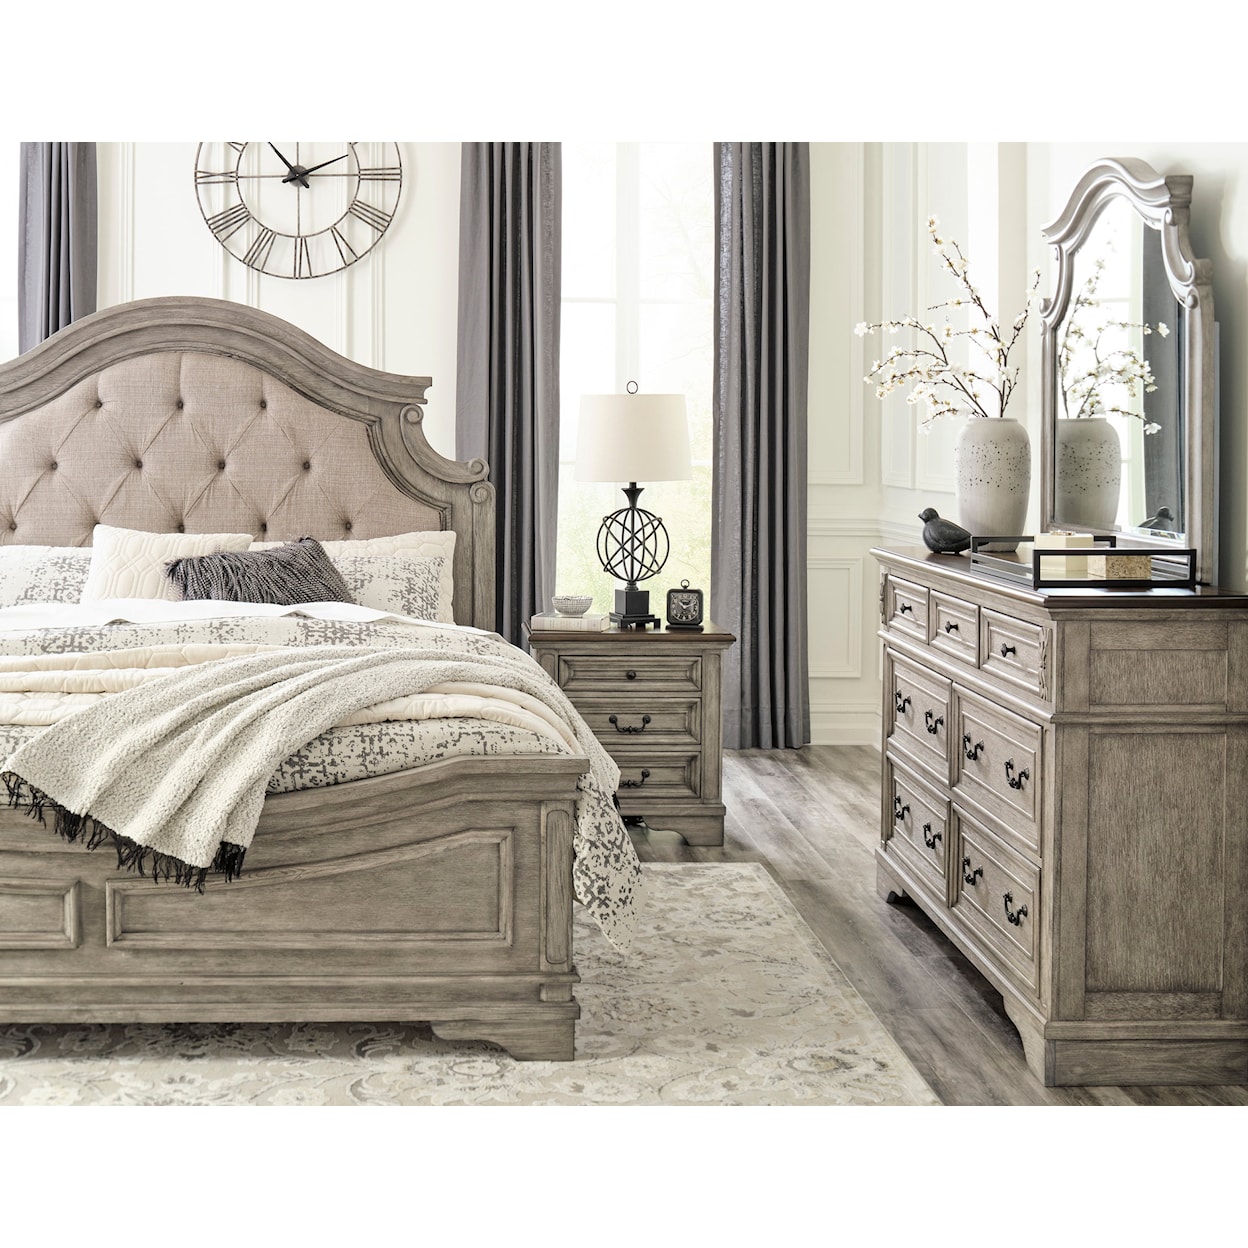 Signature Design by Ashley Lodenbay 5 Piece King Bedroom Set